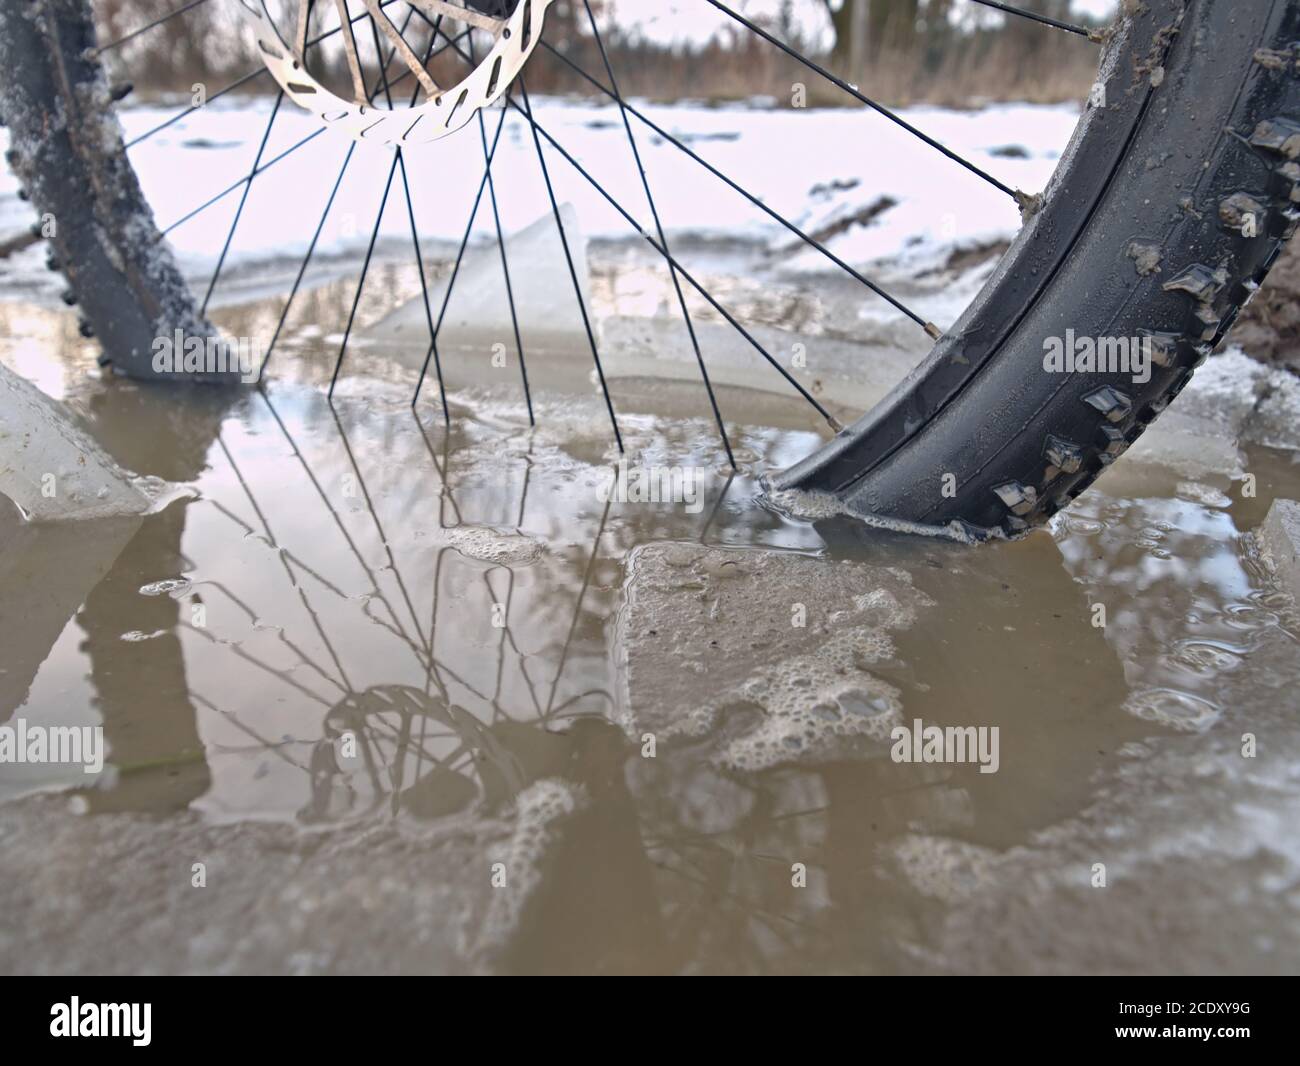 Bike drowned in muddy pool within winter trip. Broken pieces of ice around freeze terain tyre Stock Photo